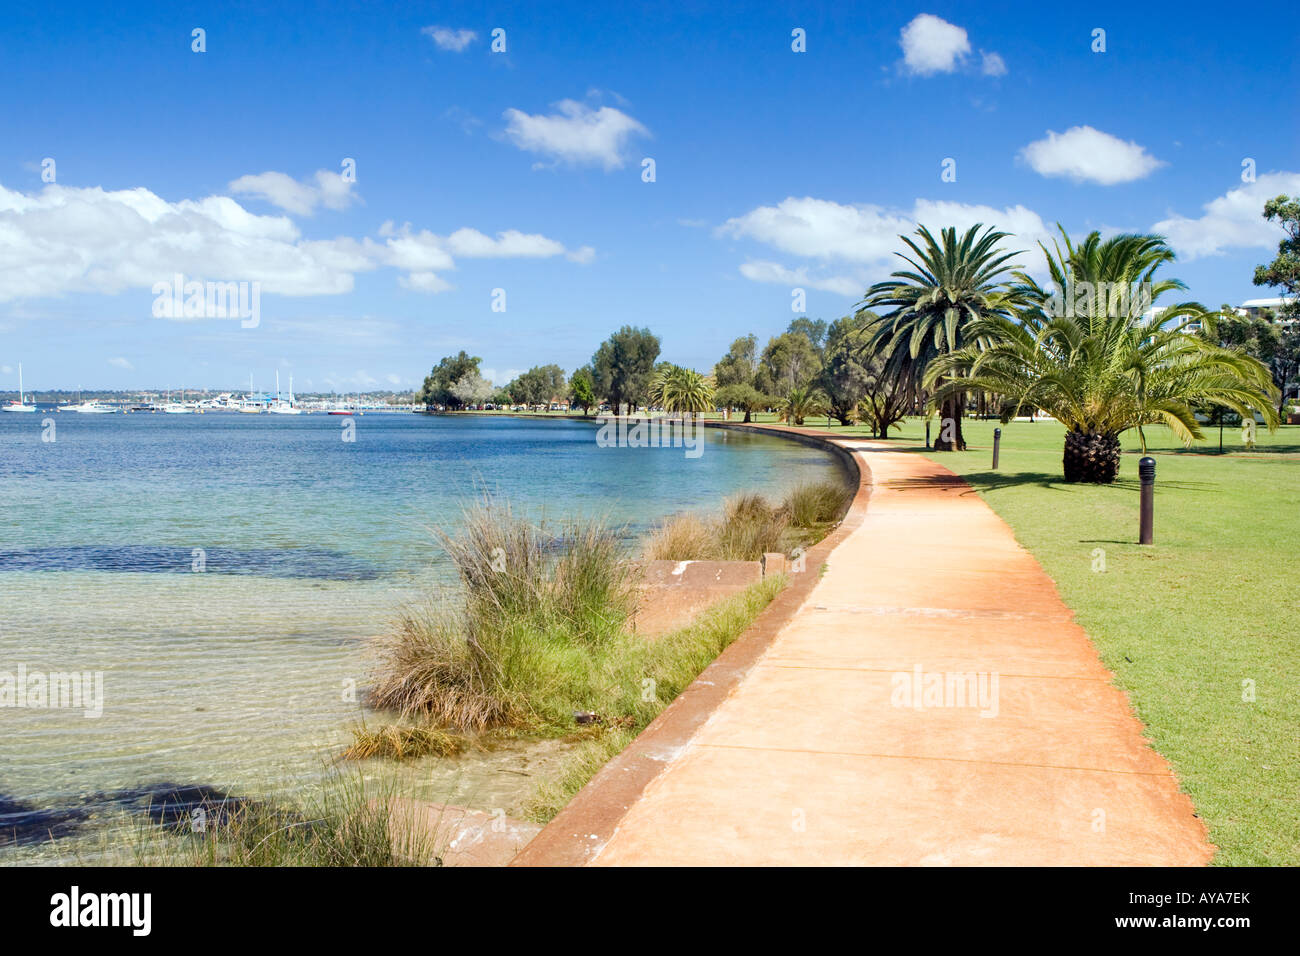 A palm tree lined path beside the Swan River near Pelican Point in Crawley, Perth. A marina can be seen in the distance. Stock Photo